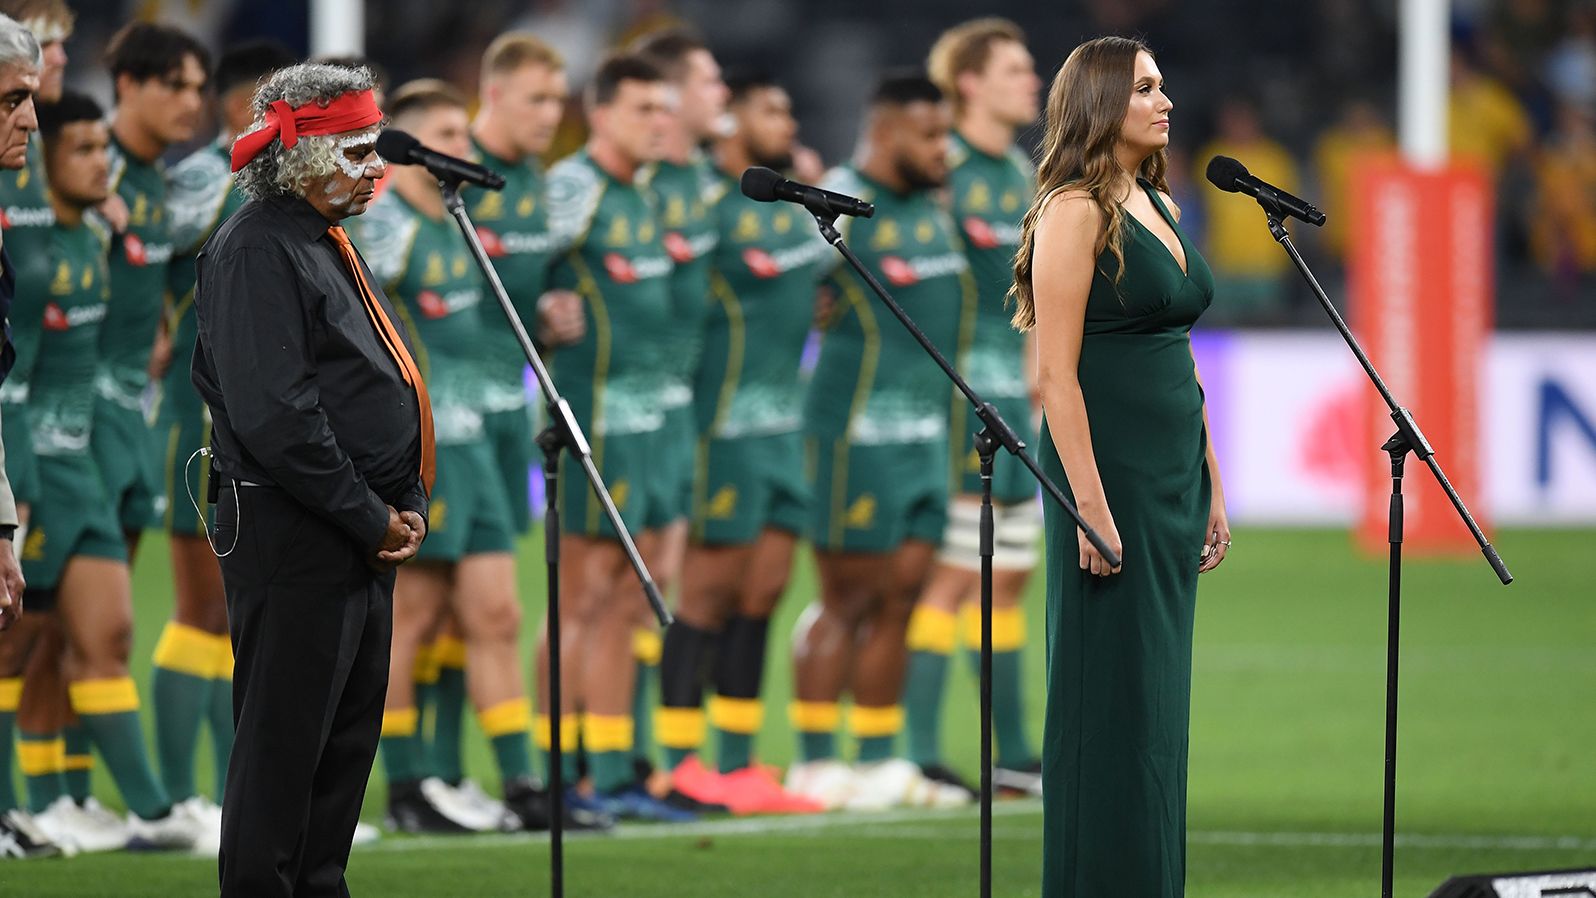 Olivia Fox sings Australia's National Anthem in the traditional Eora language during the Tri Nations rugby match between Argentina's Pumas and Australia's Wallabies at Bankwest Stadium, Sydney, Australia, December 5, 2020.